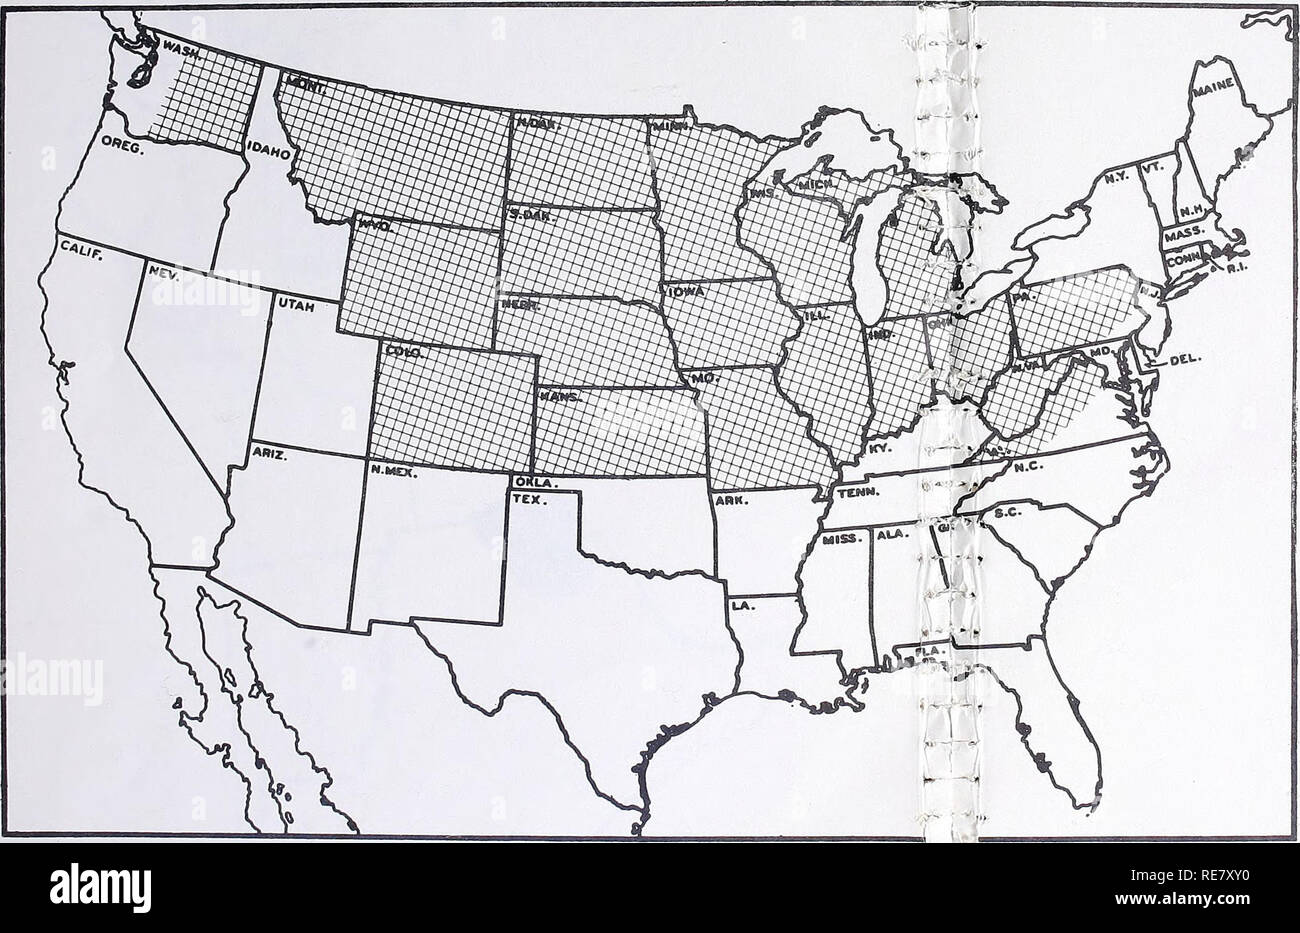 . Cooperative economic insect report. Insect pests Control United States Periodicals. BLACK STEM RUST QUARANTINE Areas shaded are designated as eradication area;. Revised September 30, 1967 h: s. v , ' Aqricul Plant Pest Control Division Cooperating with affected States * rlir S. Department of Agriculture Agricultural Research Service Restrictions are imposed on the movement of regulated articles as follows: 1. Berberis, Mahoberberis and Mahonia Plants: a. Rust-susceptible plants--movement prohibited. b. Rust-resistant plants--movement allowed under certificate or permit. 2. Seeds and Fruits o Stock Photo